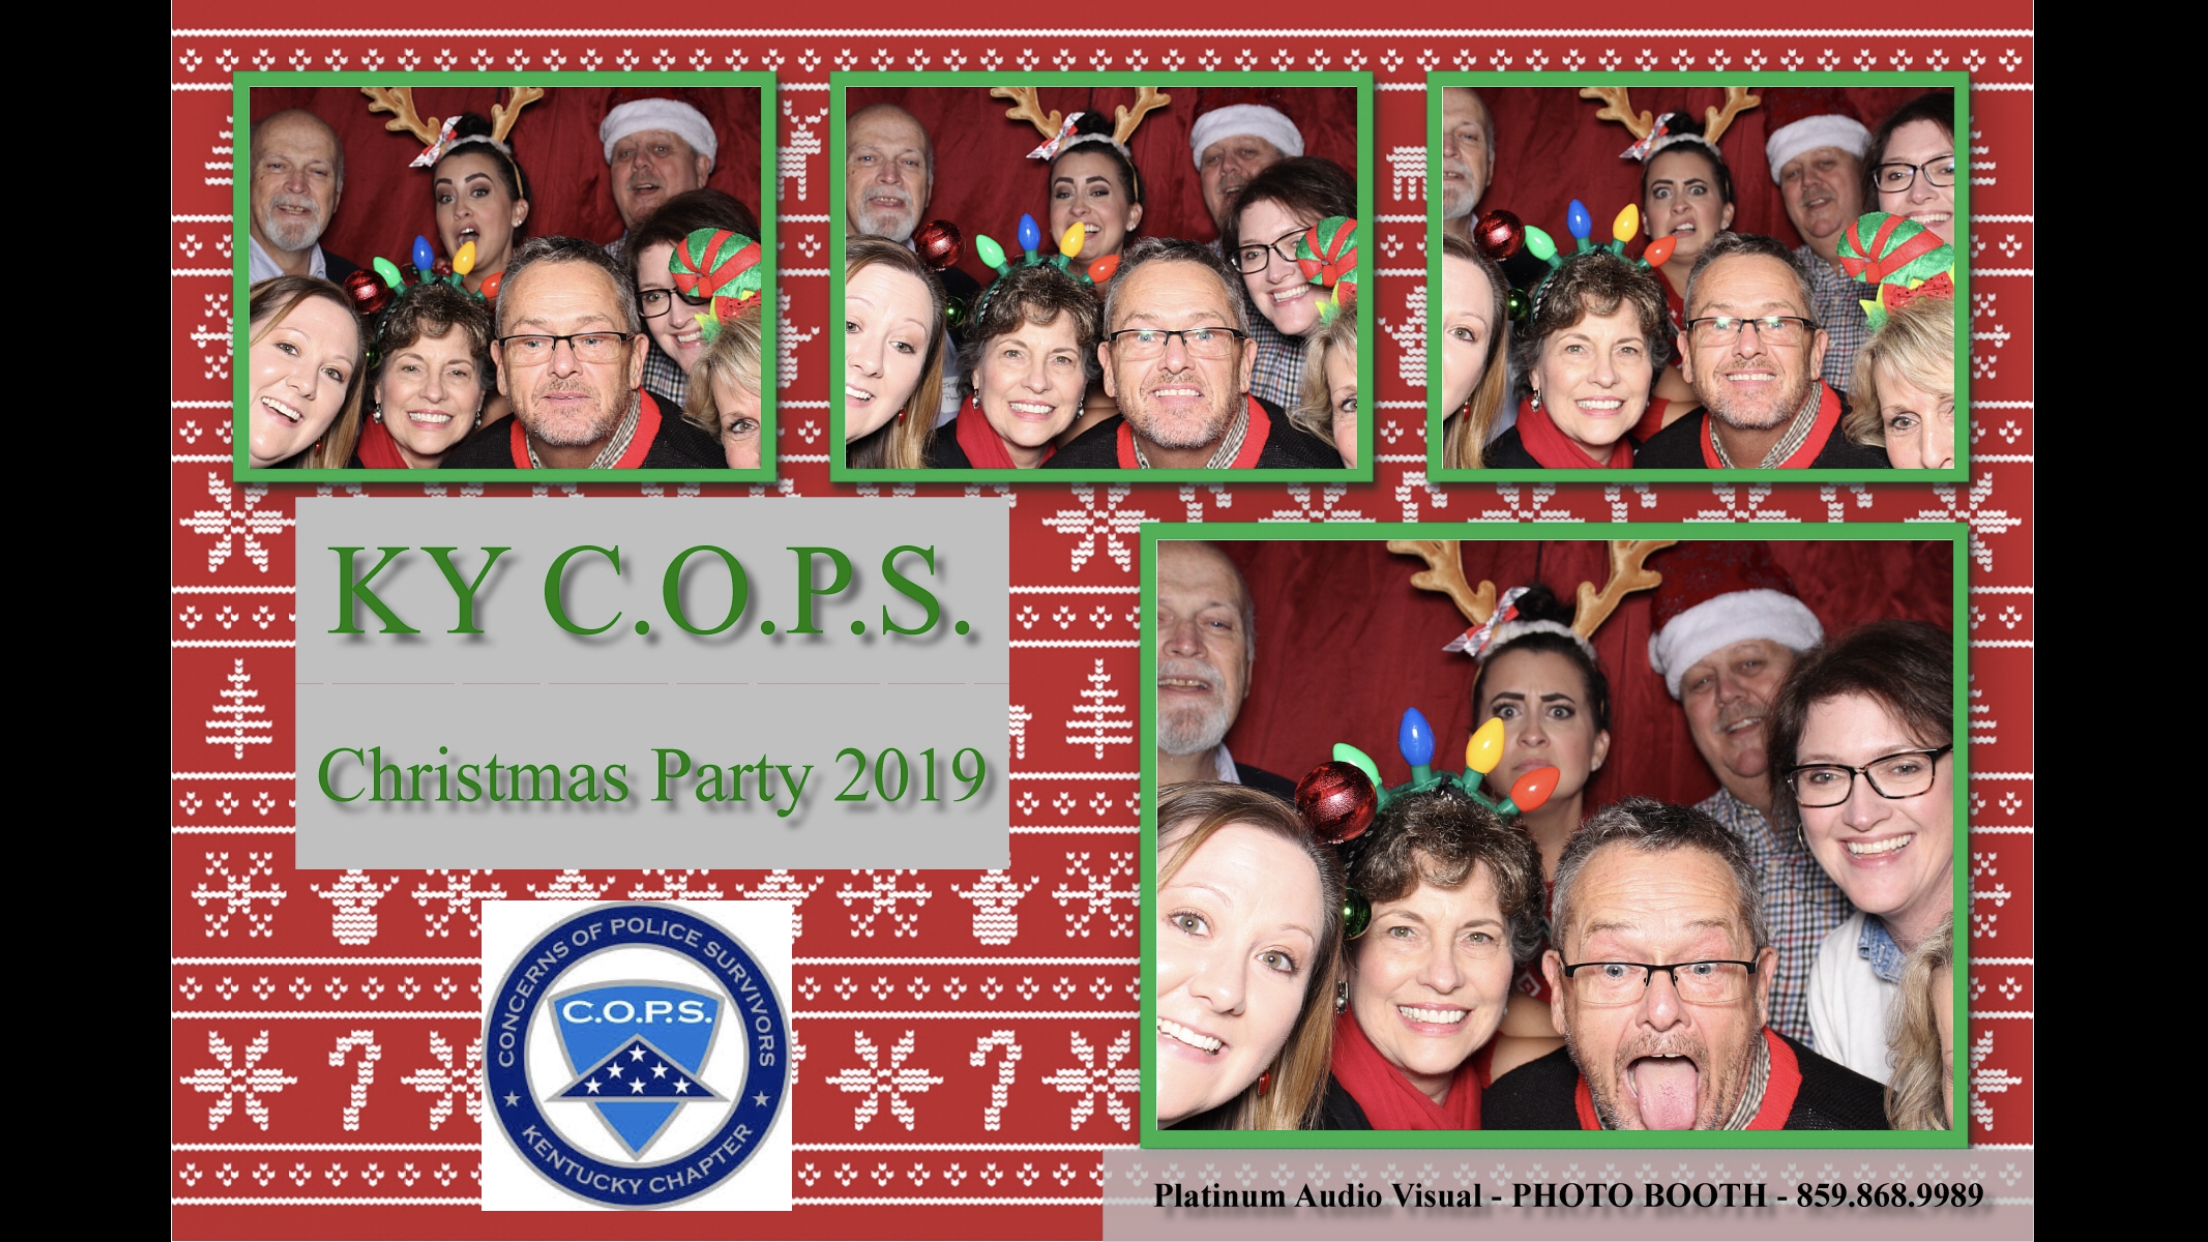 COPS Christmas Party 2019 • Photo Booth!